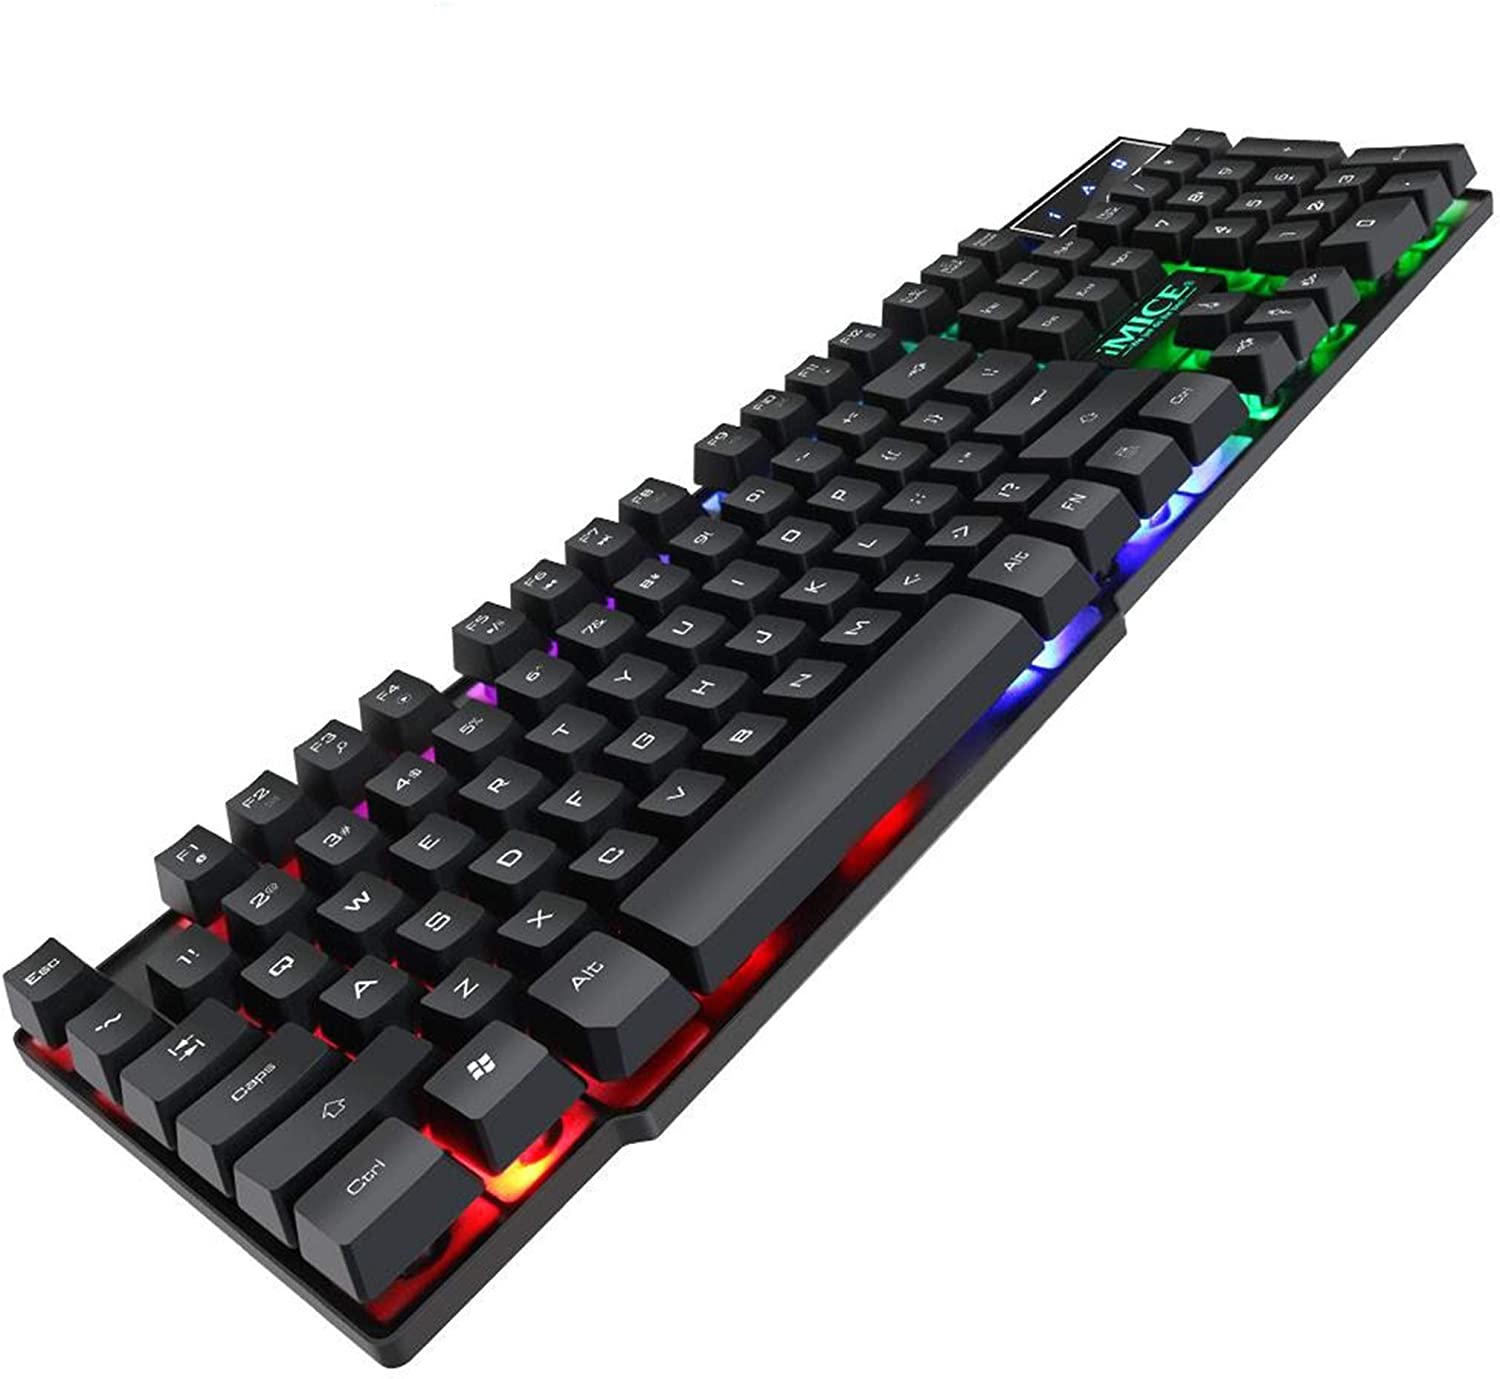 HF-IMAK600: Backlight Suspension Key Mechanical Keyboard Game Wired PC Notebook USB Wired Gaming Keyboard